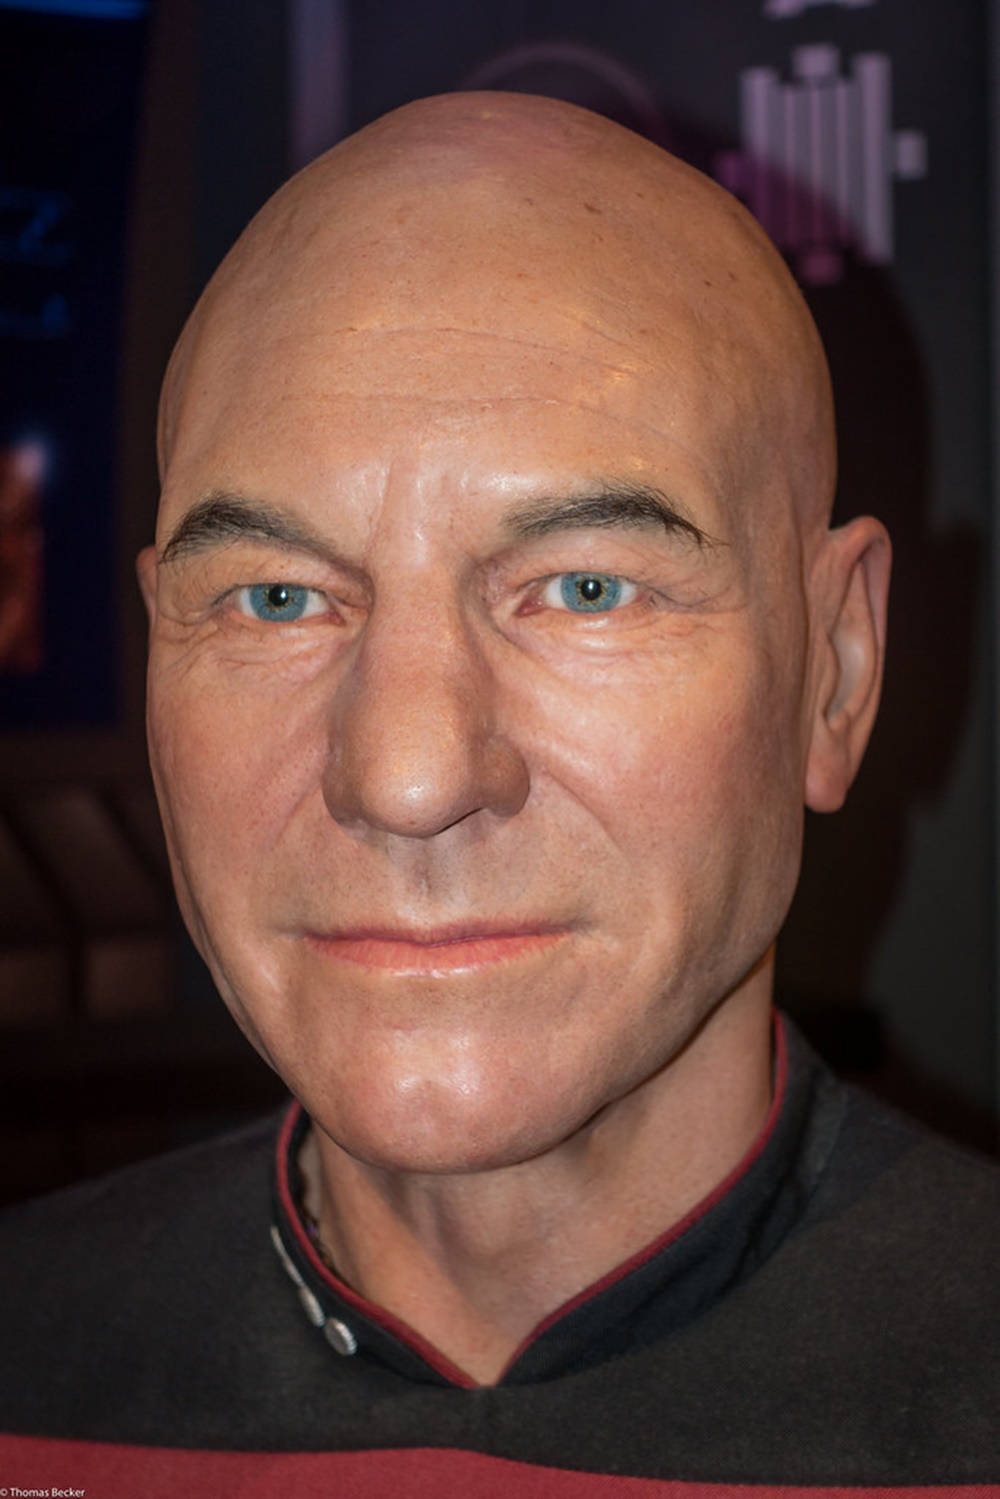 Distinguished Actor Patrick Stewart Captivates With His Steely Blue Eyes Wallpaper